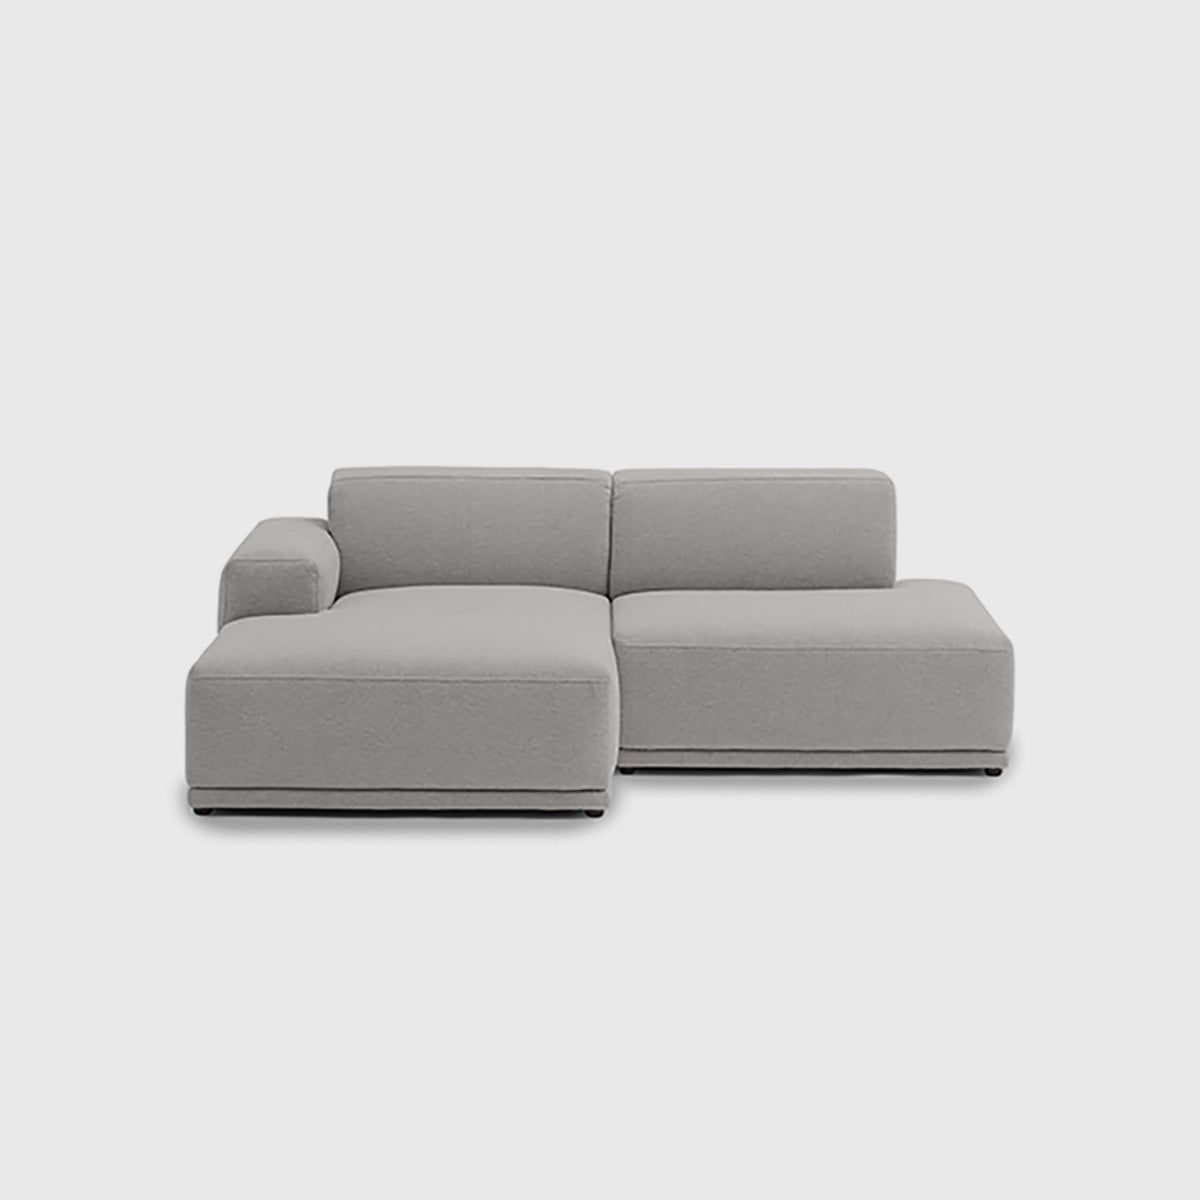 The versatility of compact sofa sectionals: A space-saving solution for your living room